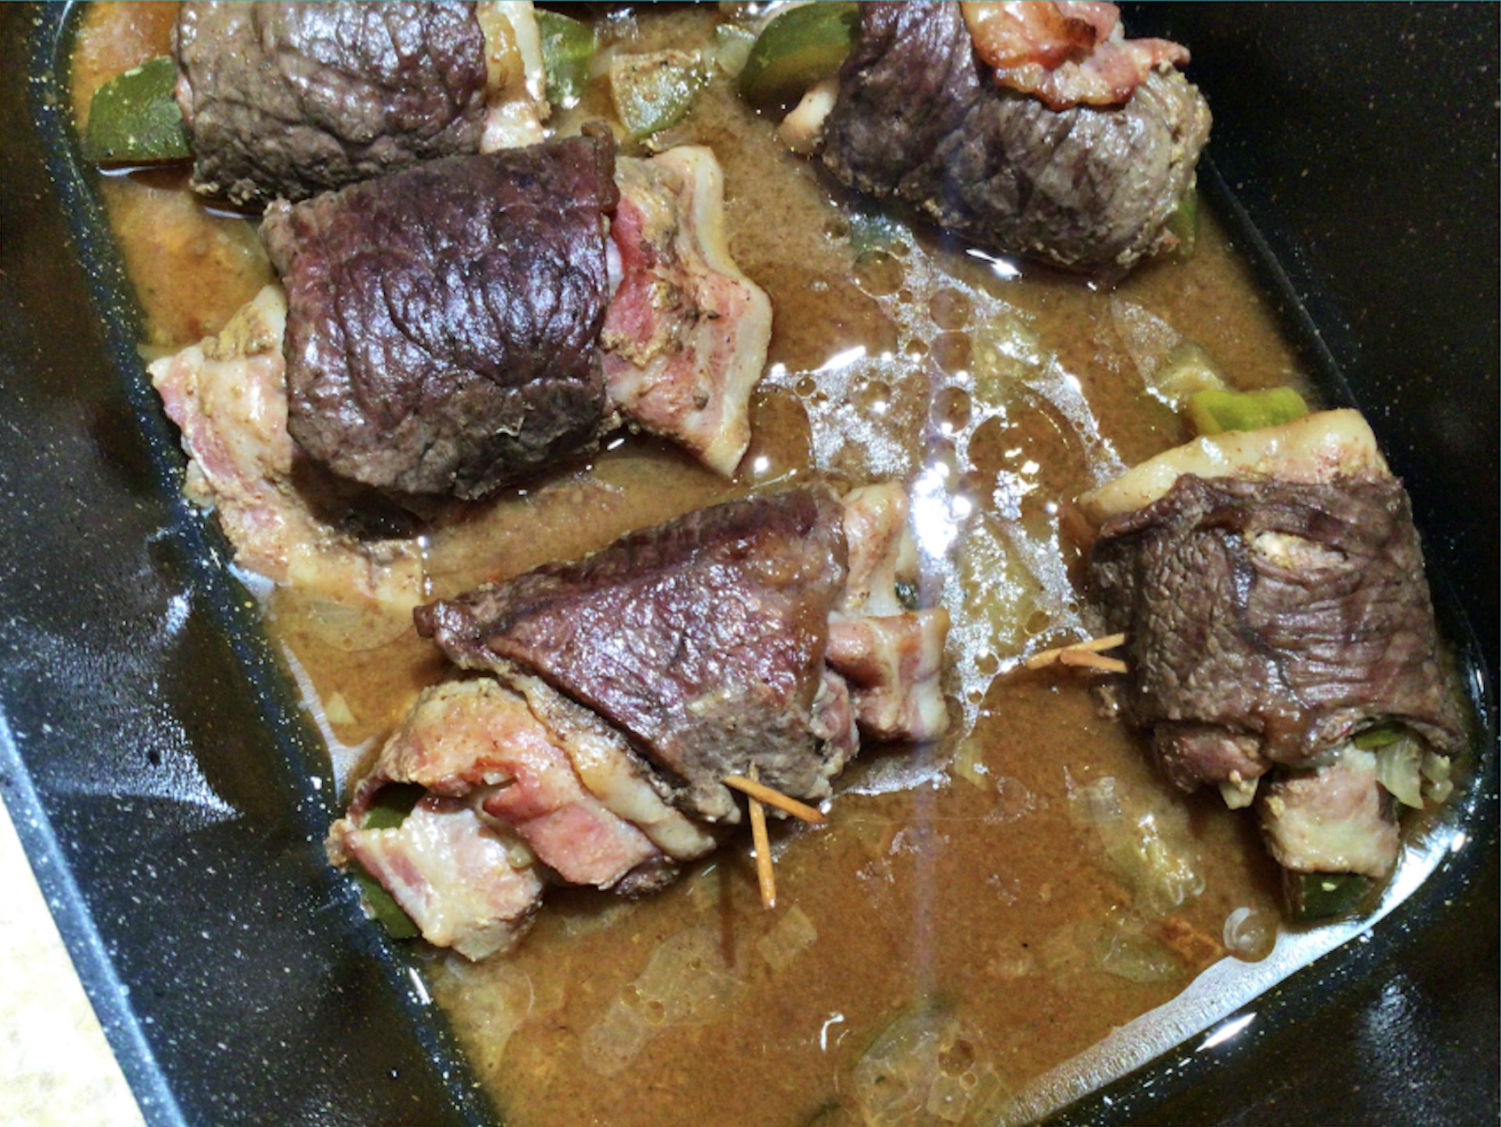 The beef rolls sit in the roaster pan. Desiree Hausman made it
for her family to try, her family liked the beef rolls.
PHOTO BY DESIREE HAUSMAN